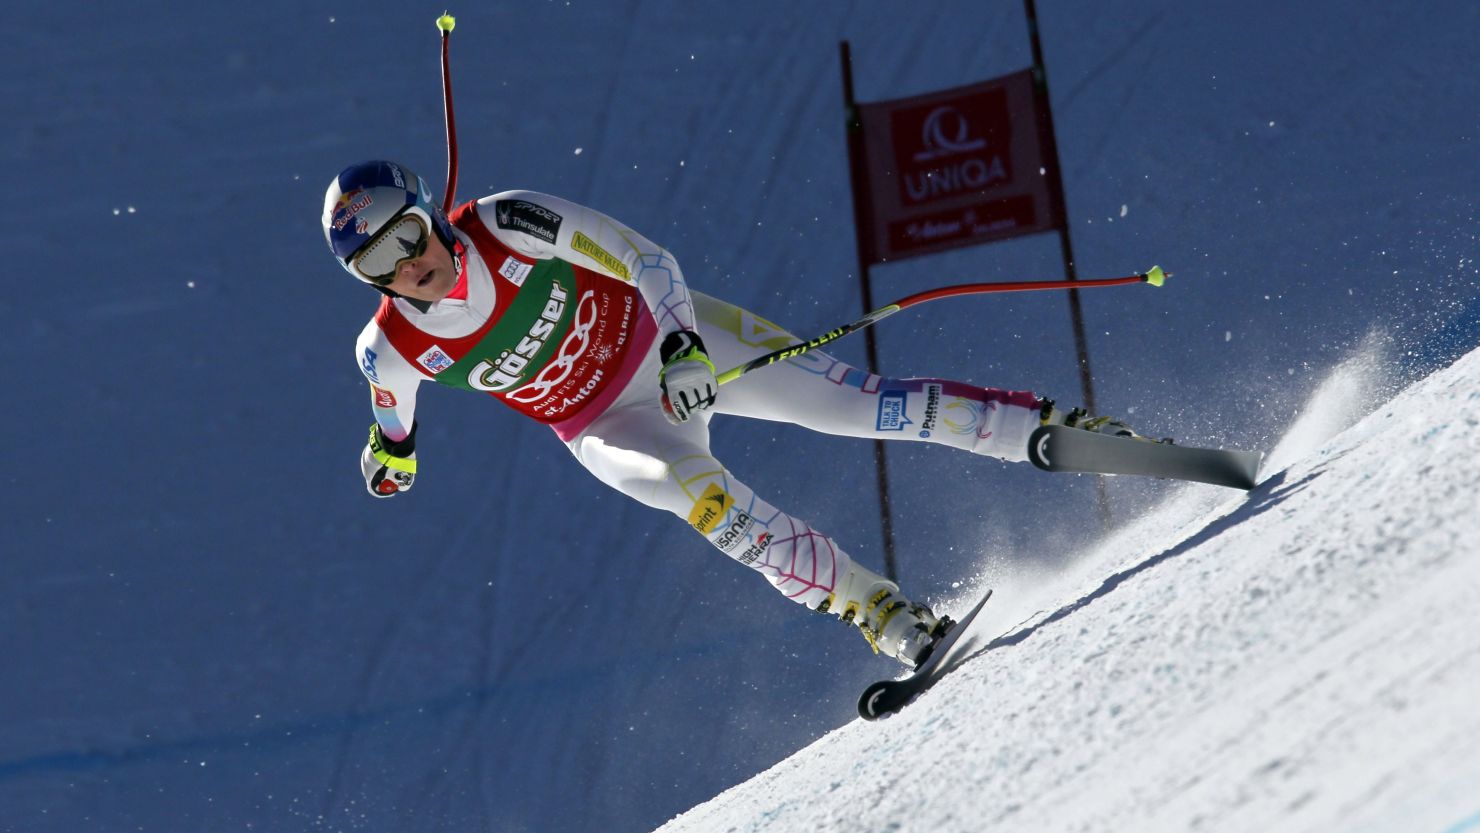 U.S. skier Lindsey Vonn competes during the Alpine Ski World Cup women's downhill in St. Anton on January 12.